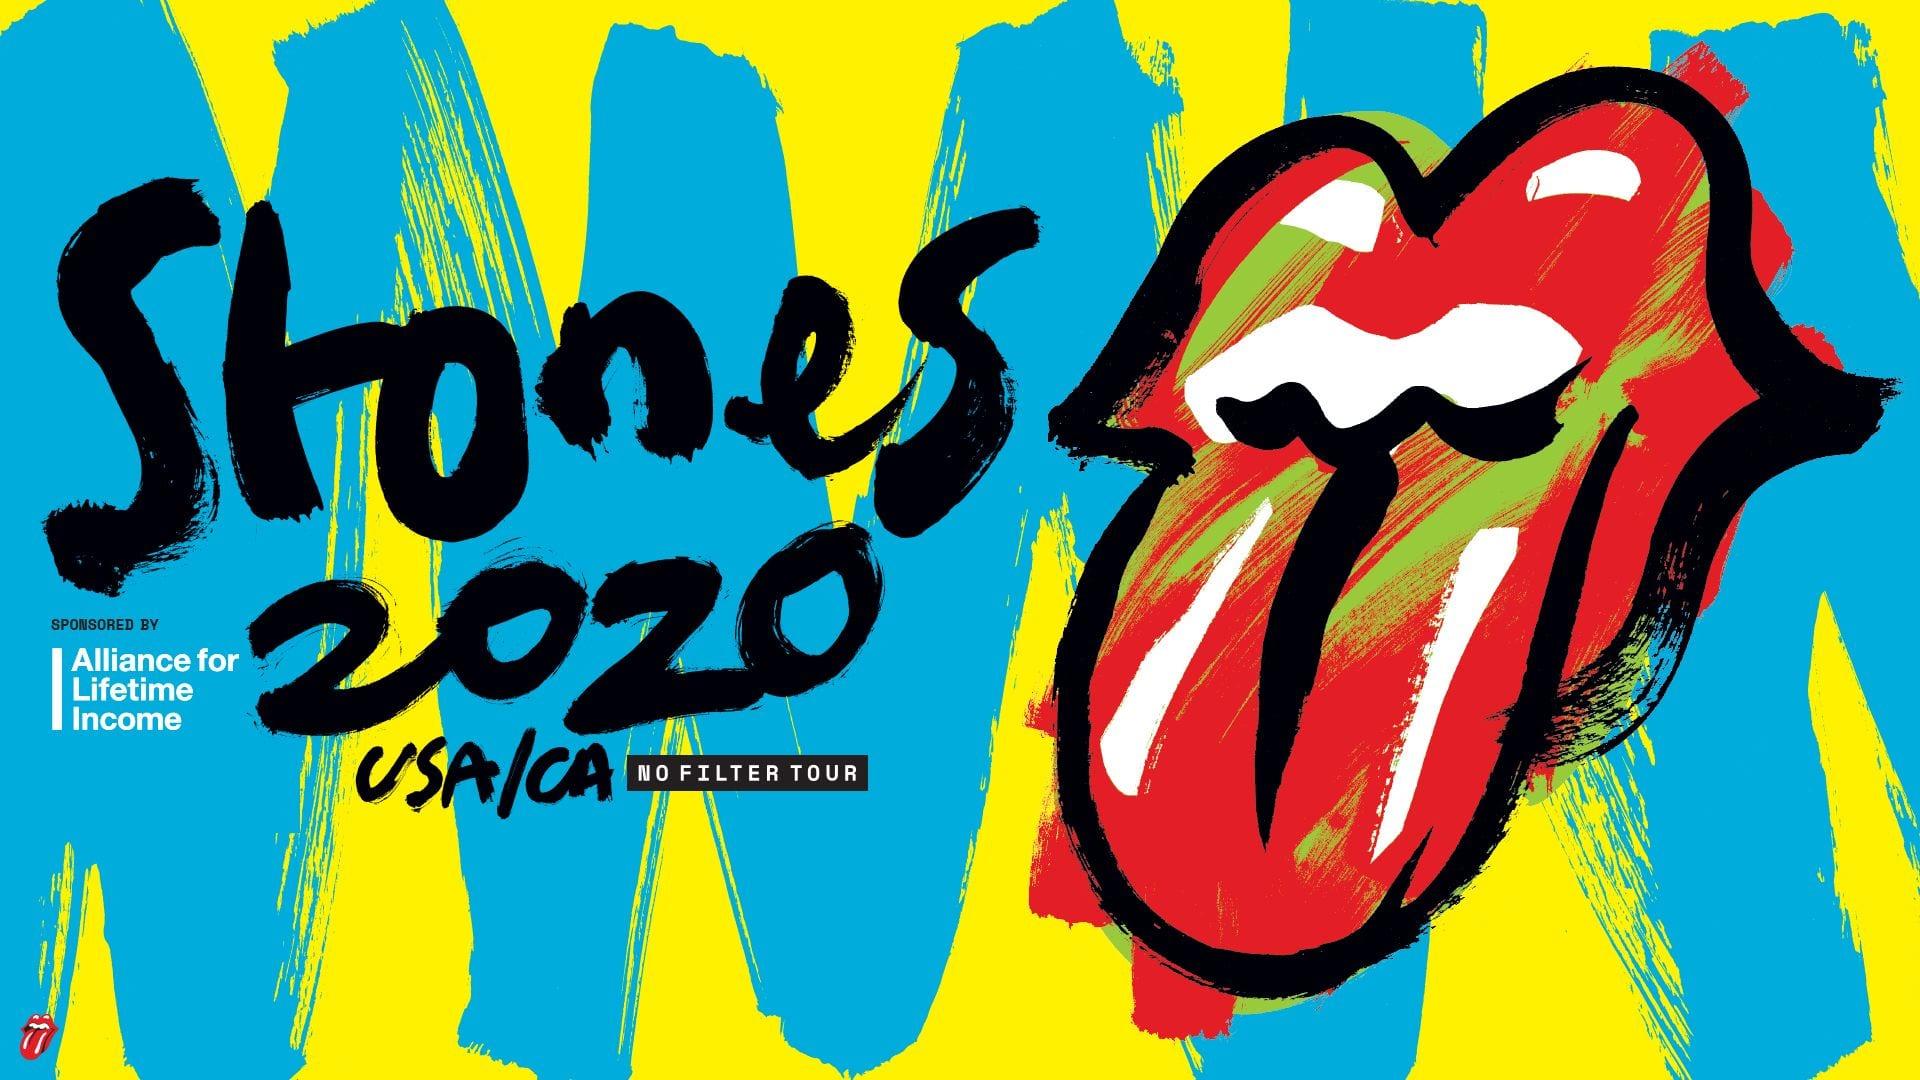 Tour Dates Announced for the Rolling Stones. Live Music News